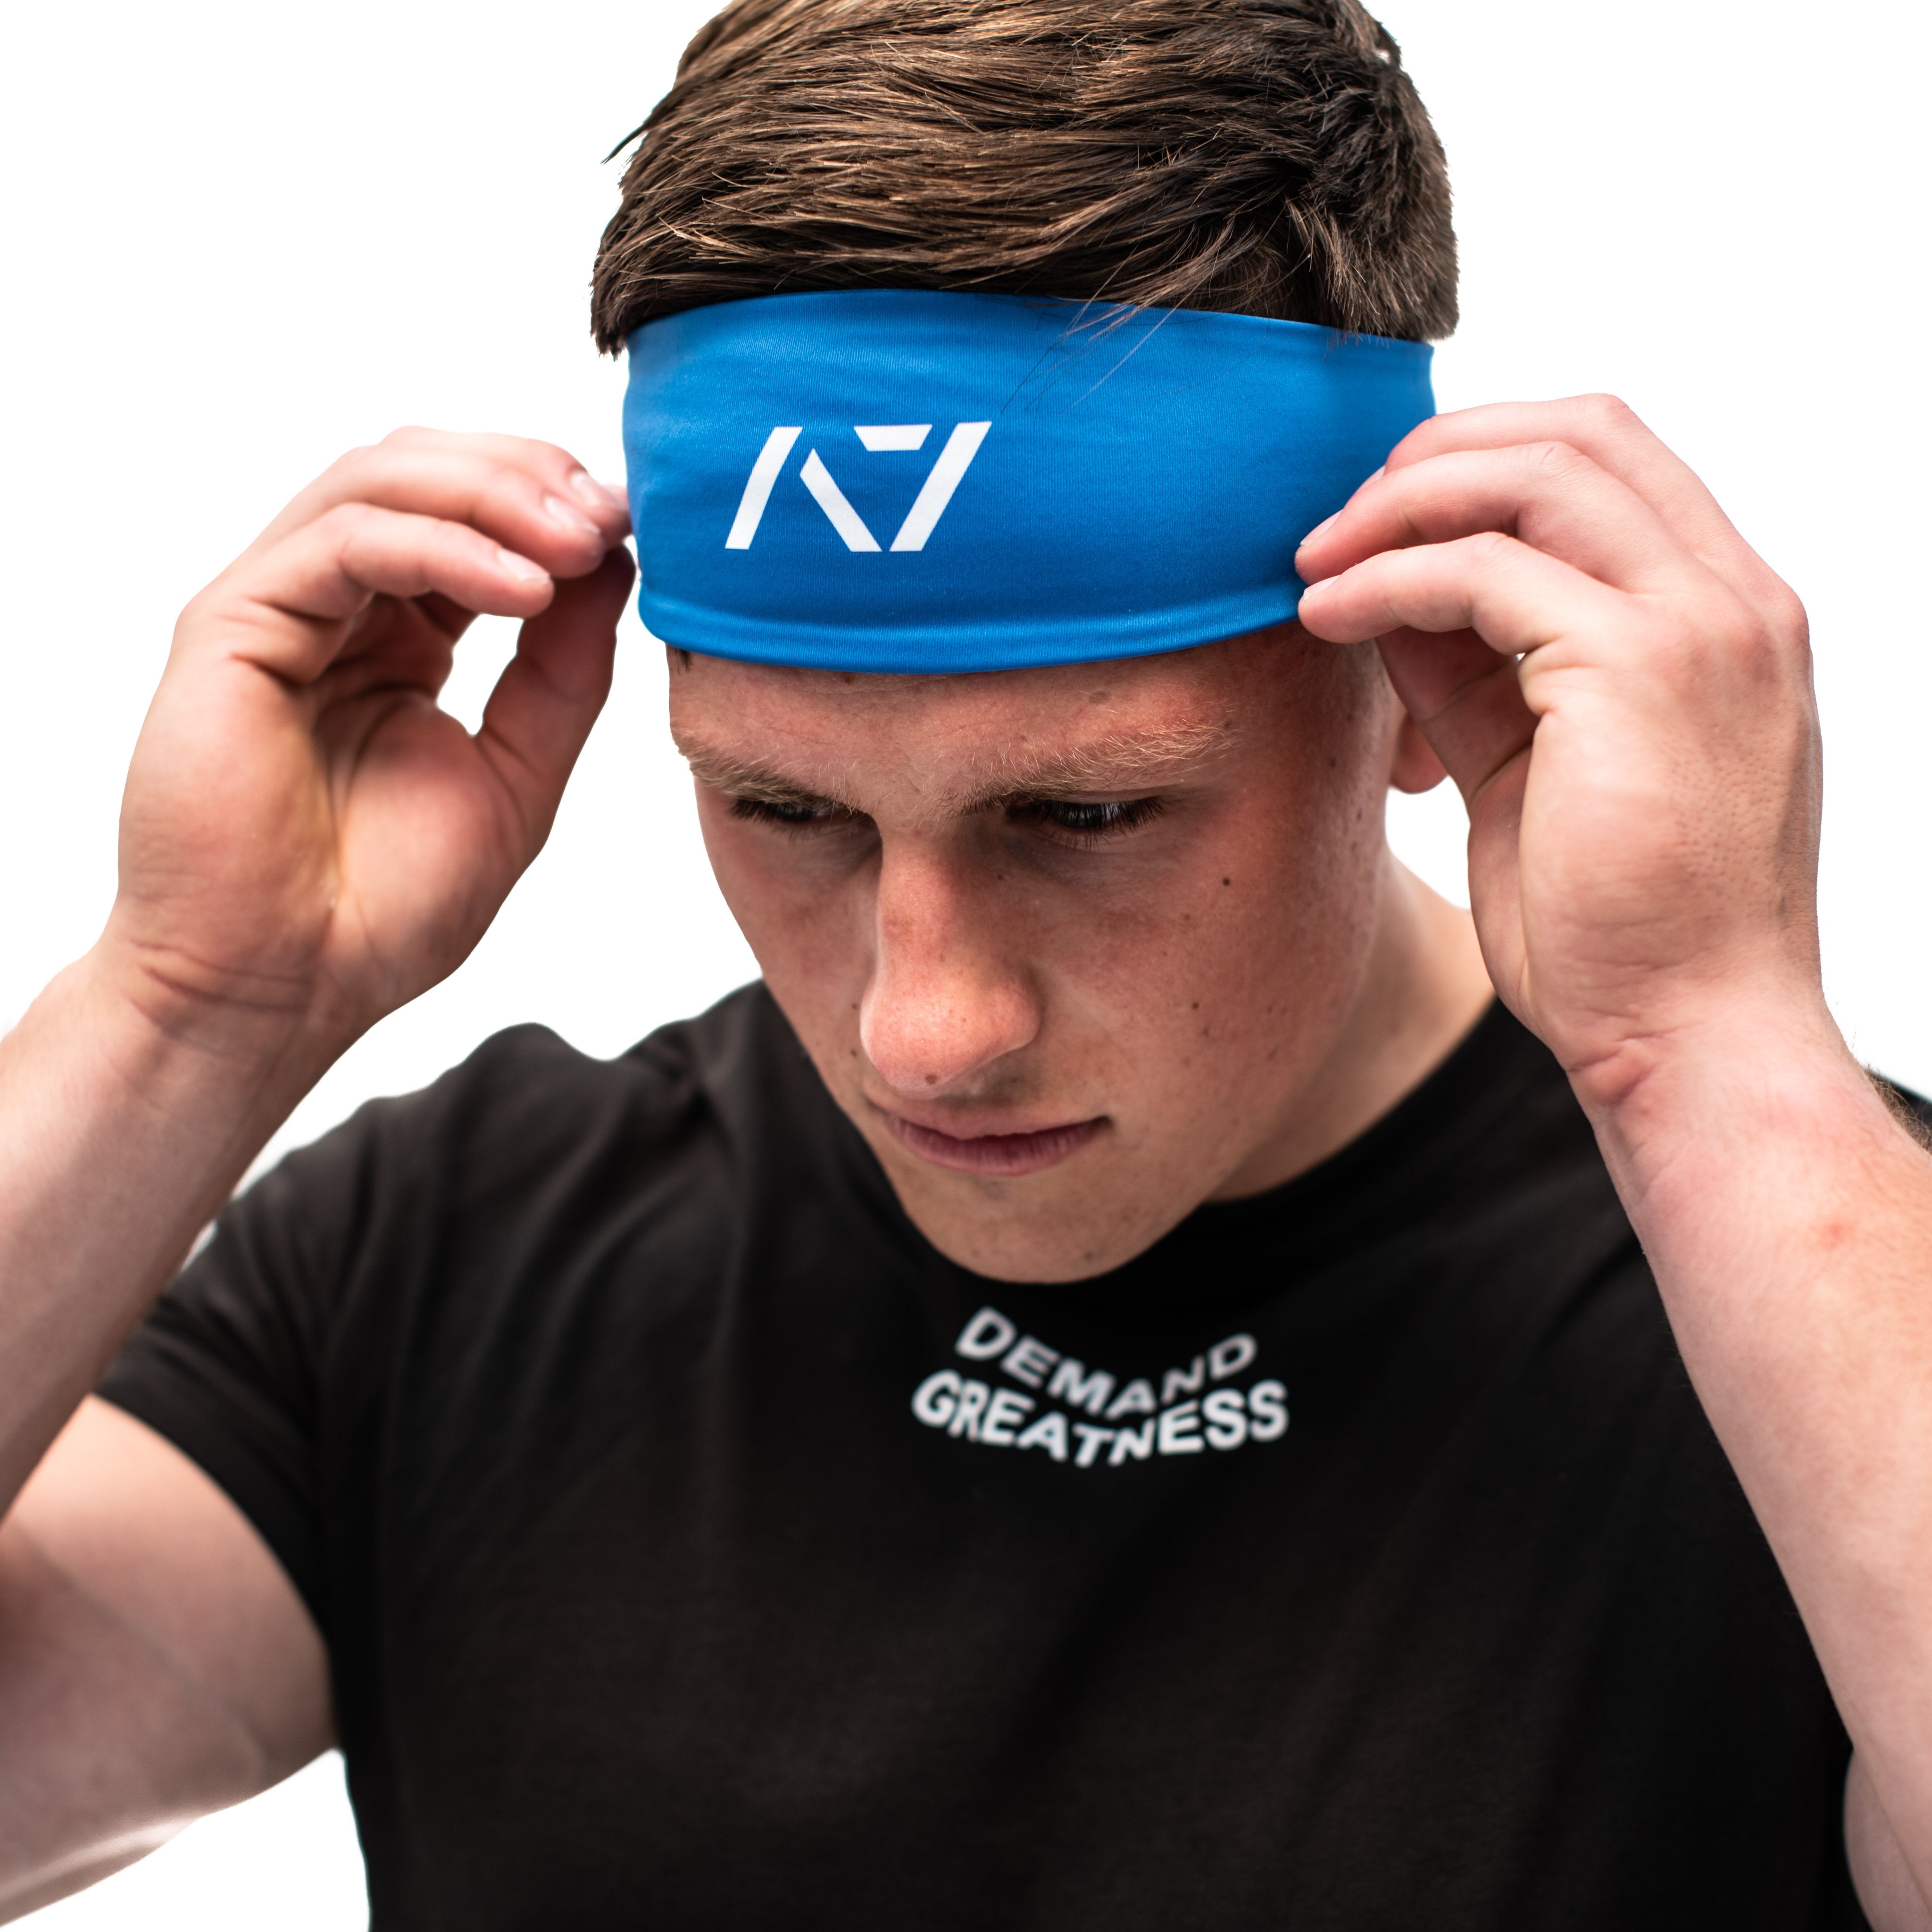 A7 Headband - IPF Approved and shipping to Europe